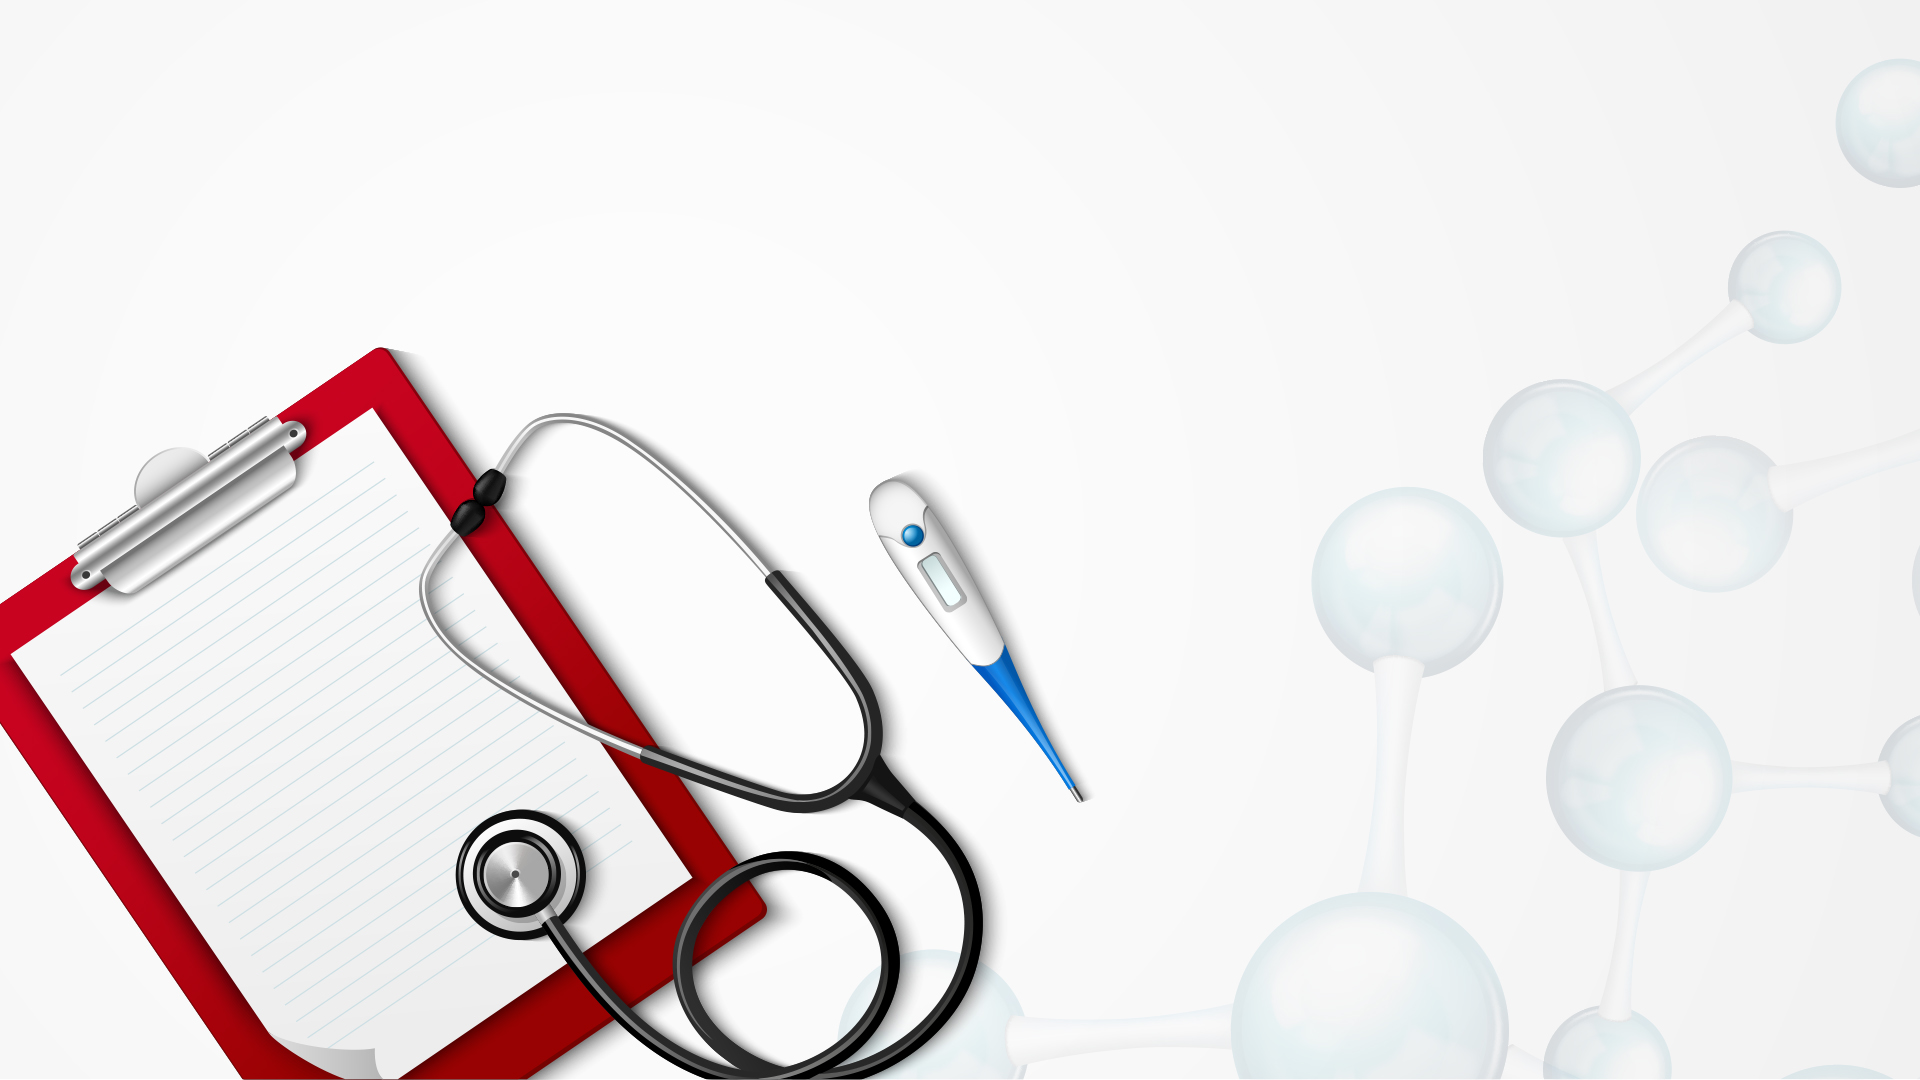 free medical powerpoint templates backgrounds